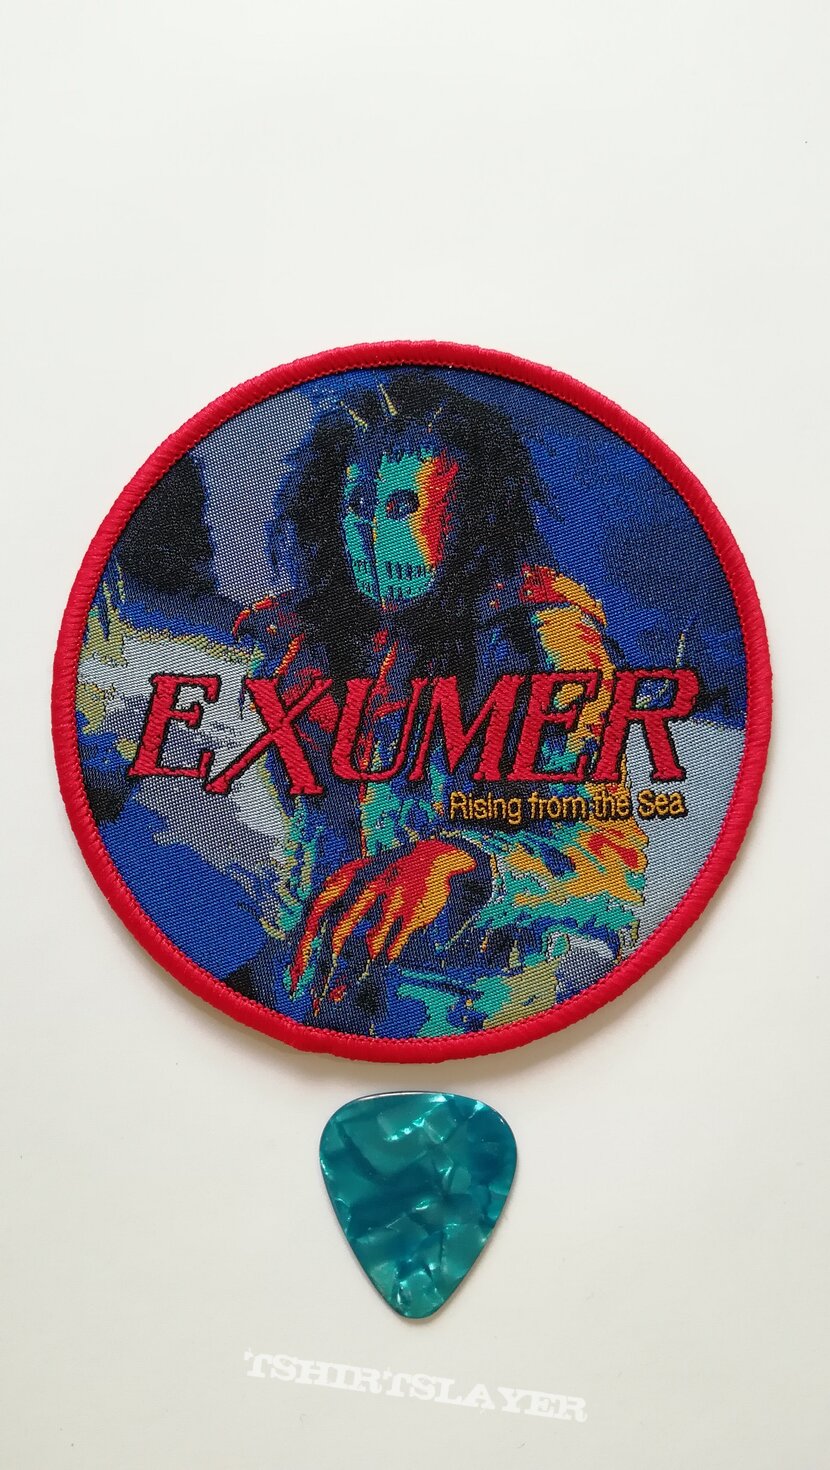 Exumer - Rising From The Sea - Patch 